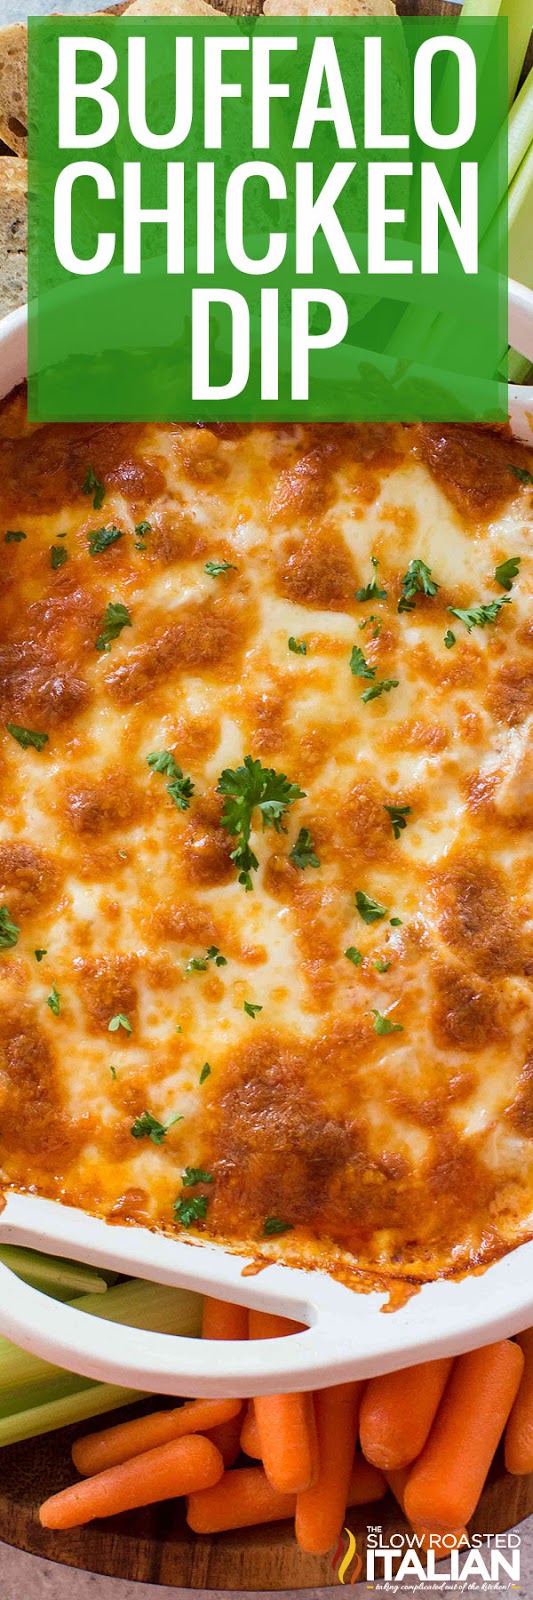 Buffalo Chicken Dip (With VIDEO)